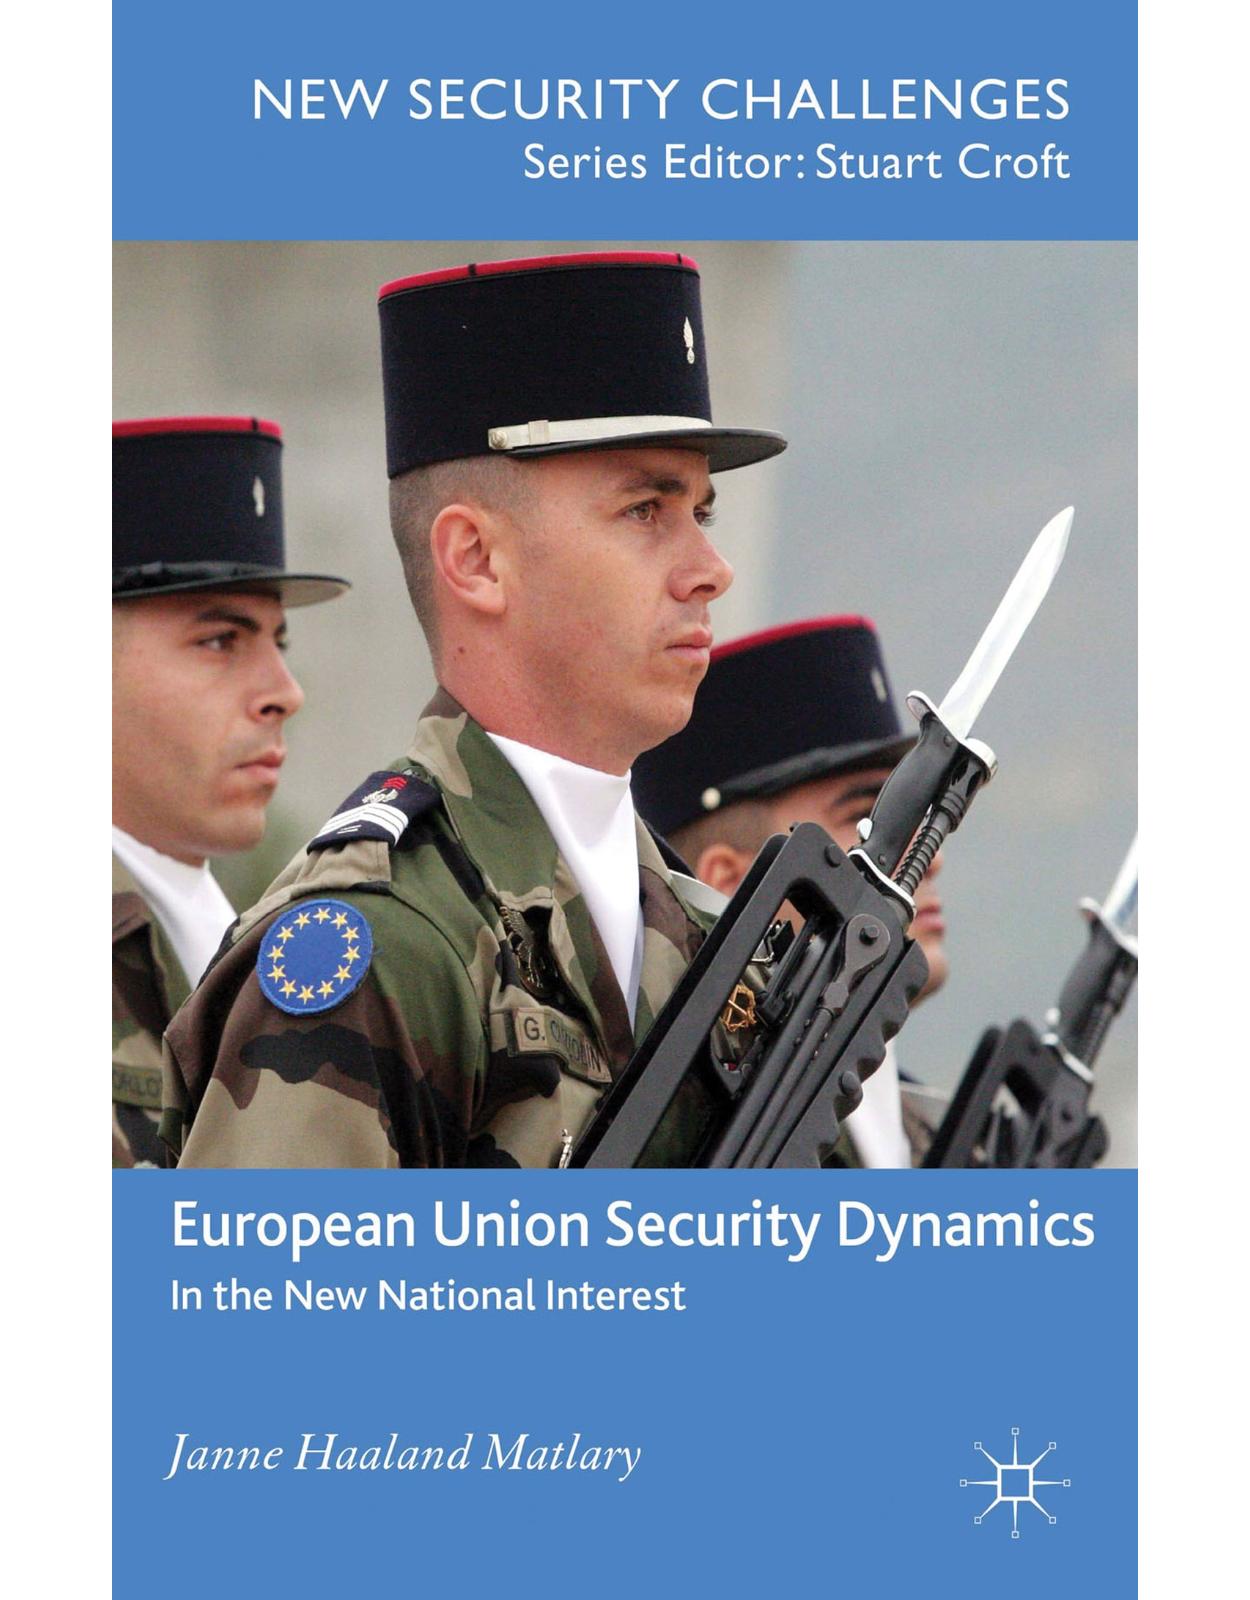 European Union Security Dynamics: In the New National Interest (New Security Challenges) 